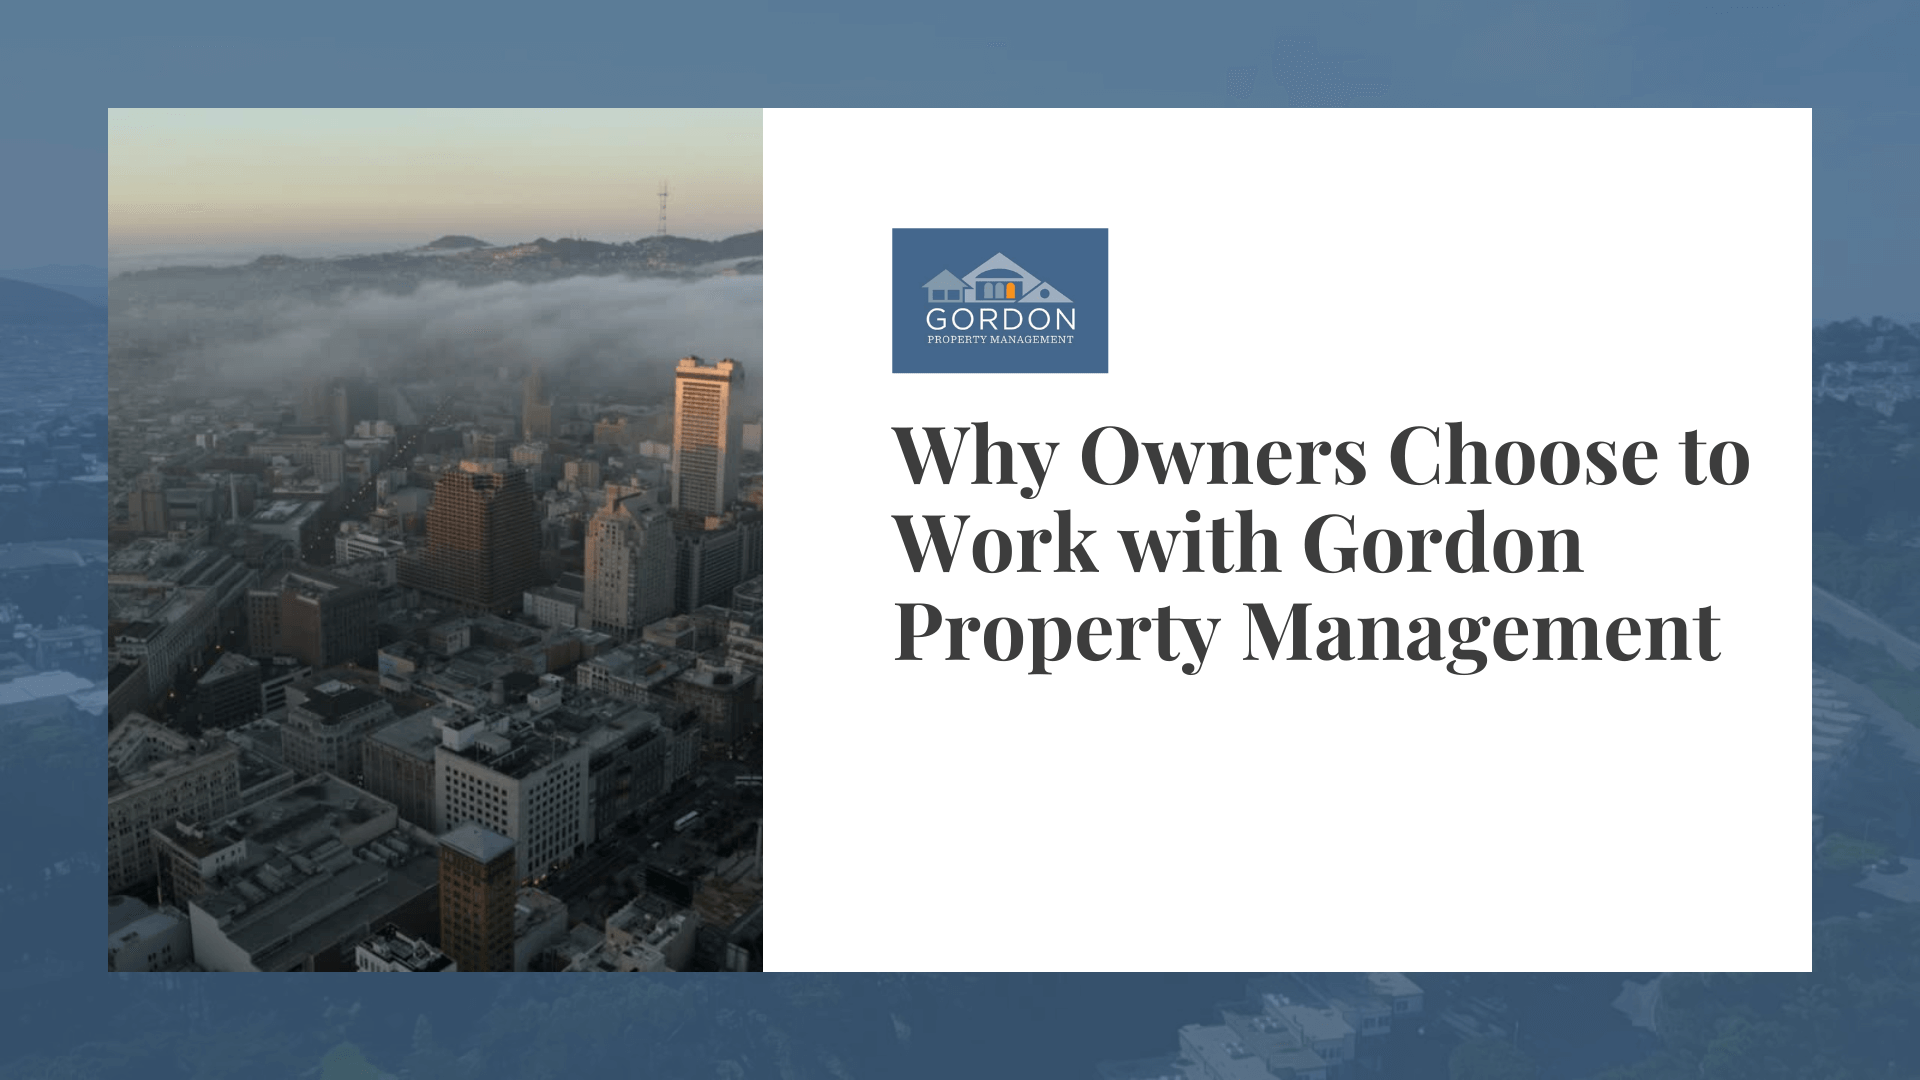 Why Owners Choose to Work with Gordon Property Management